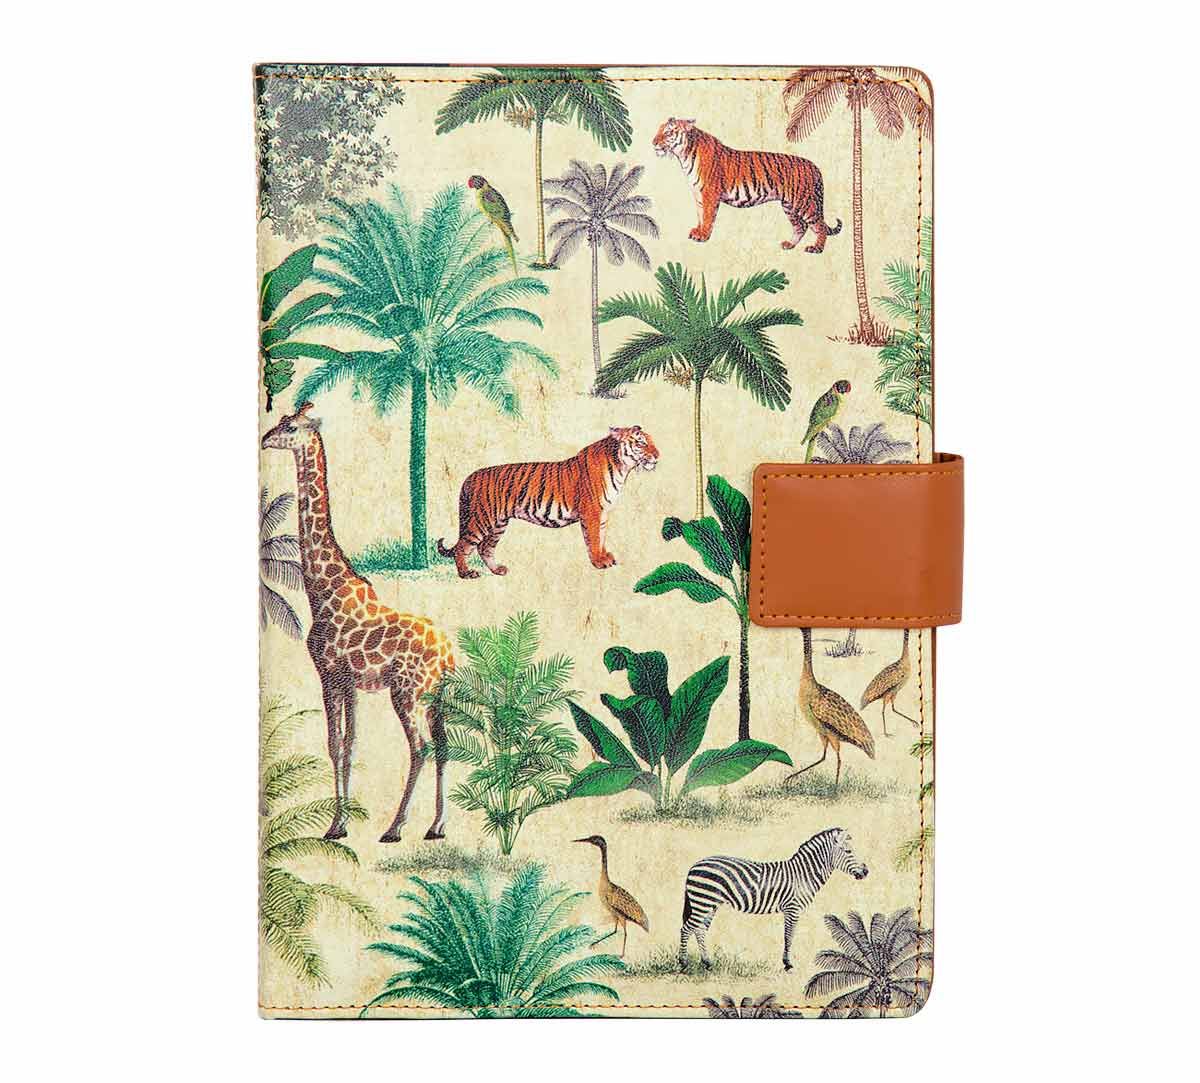 India Circus Forest Dominion Notebook Planner